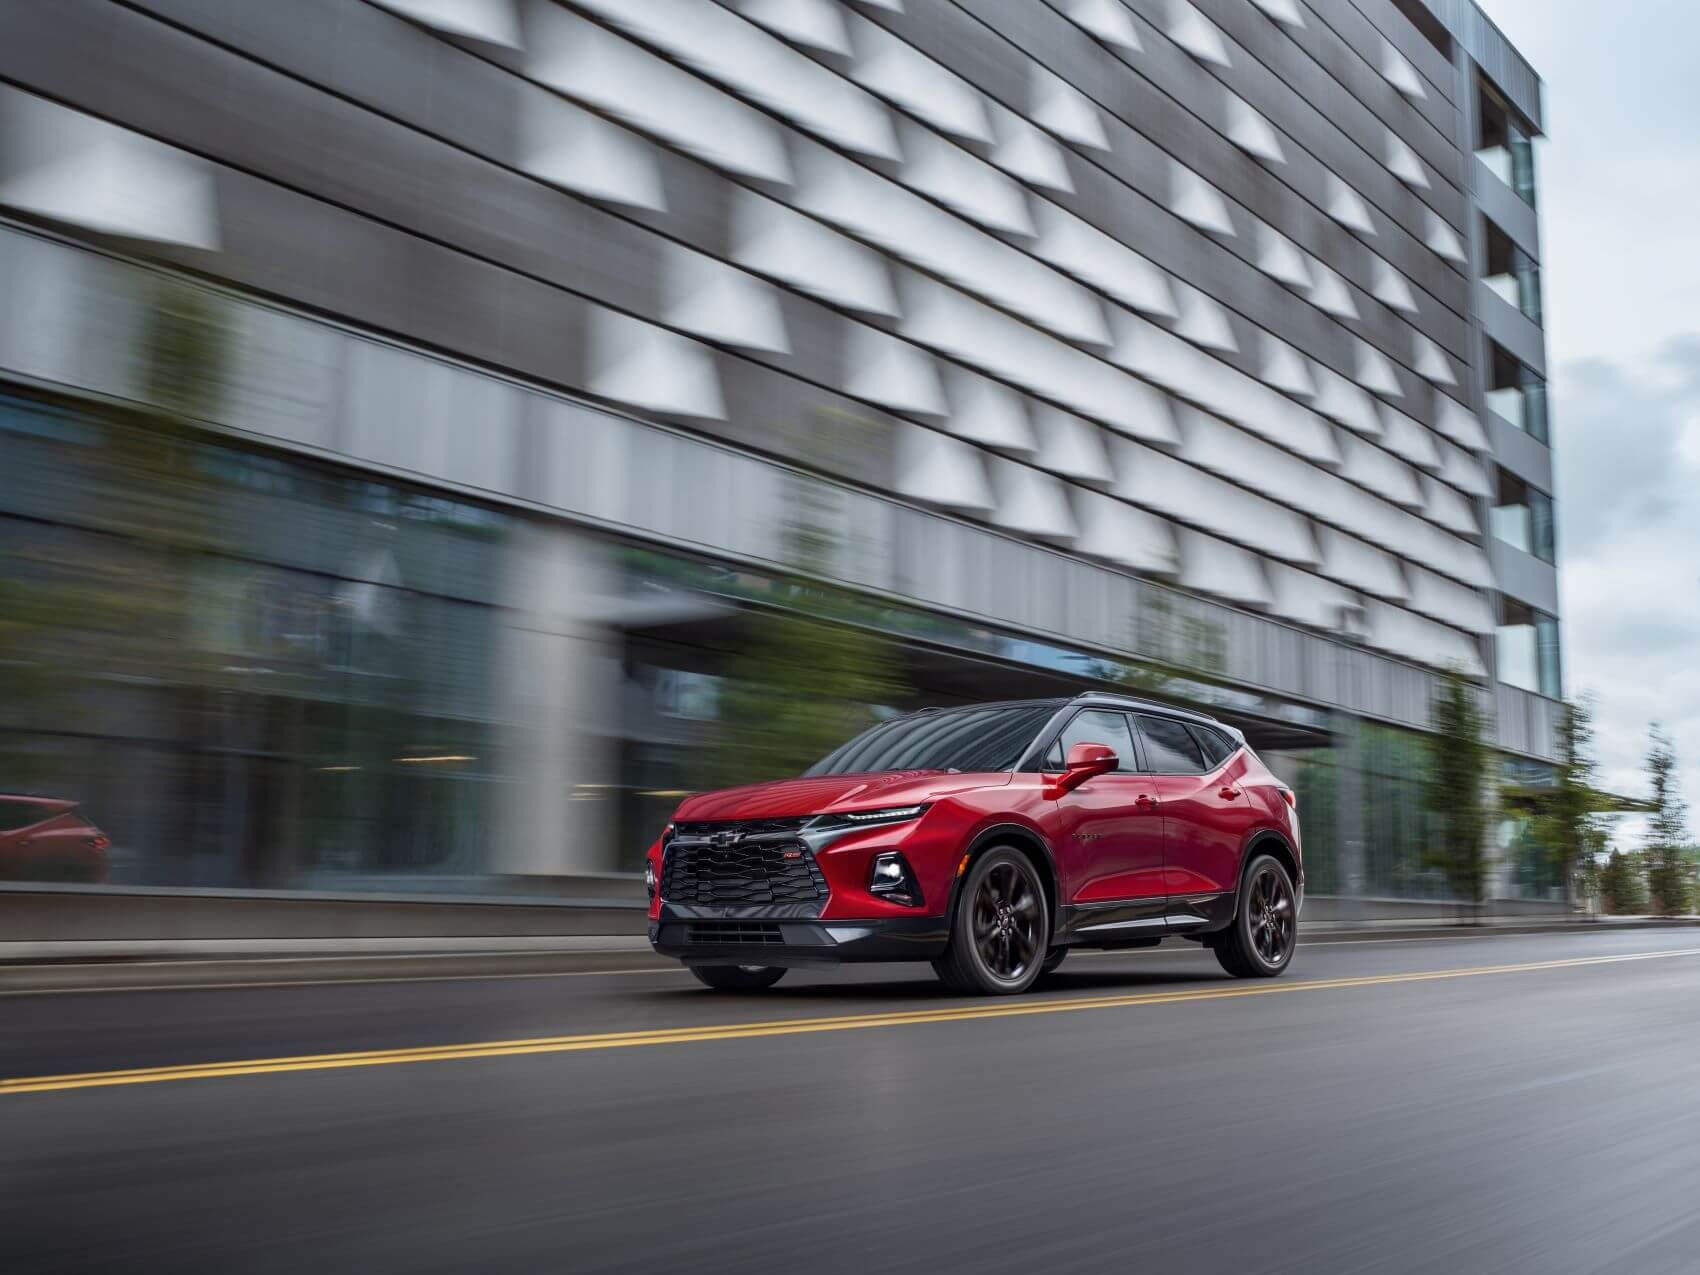 2022 Chevy Blazer Red in Action